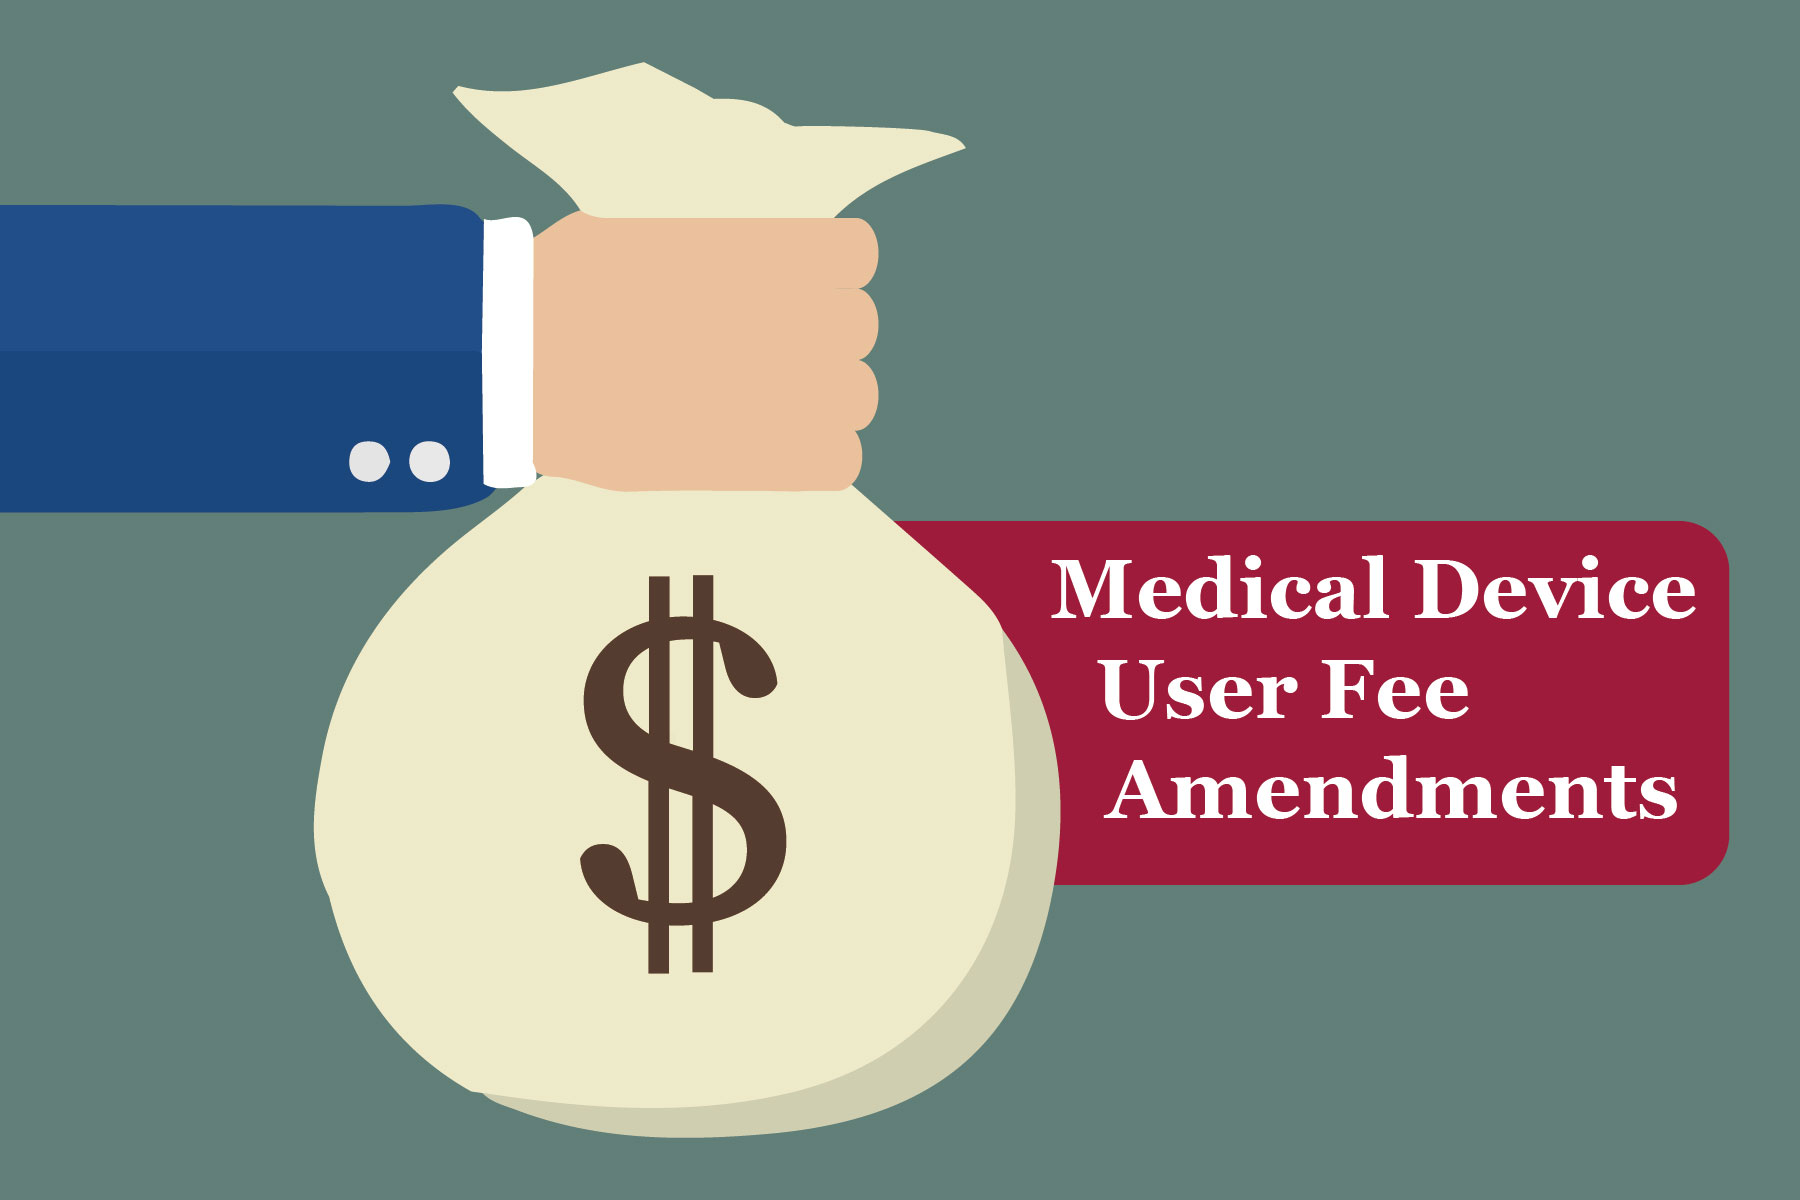 Money bag for the medical device user fees that were amendments